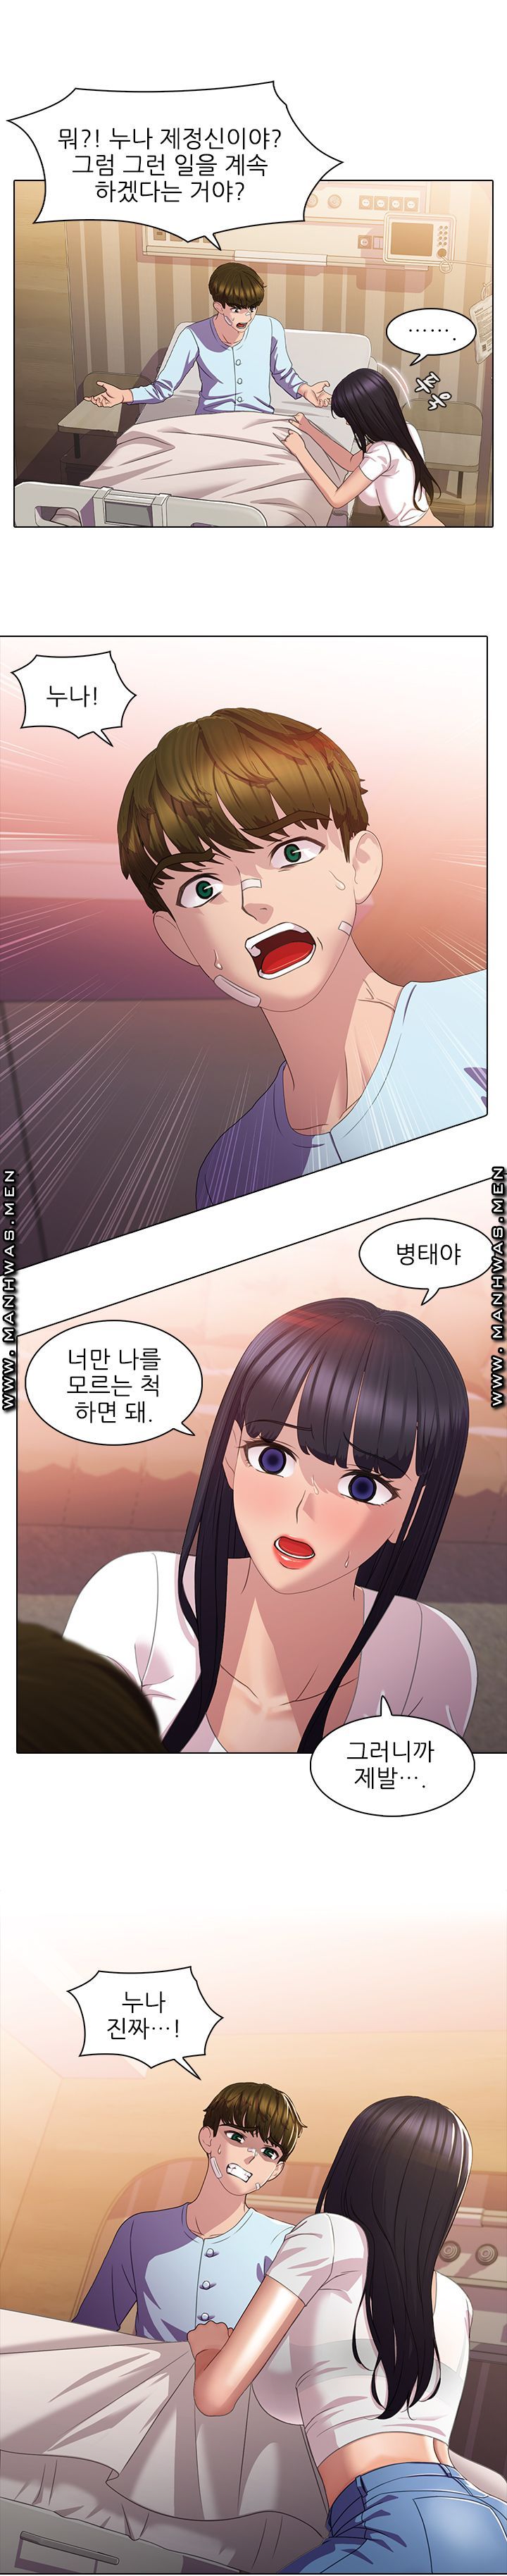 Sister's Friend Raw - Chapter 8 Page 5